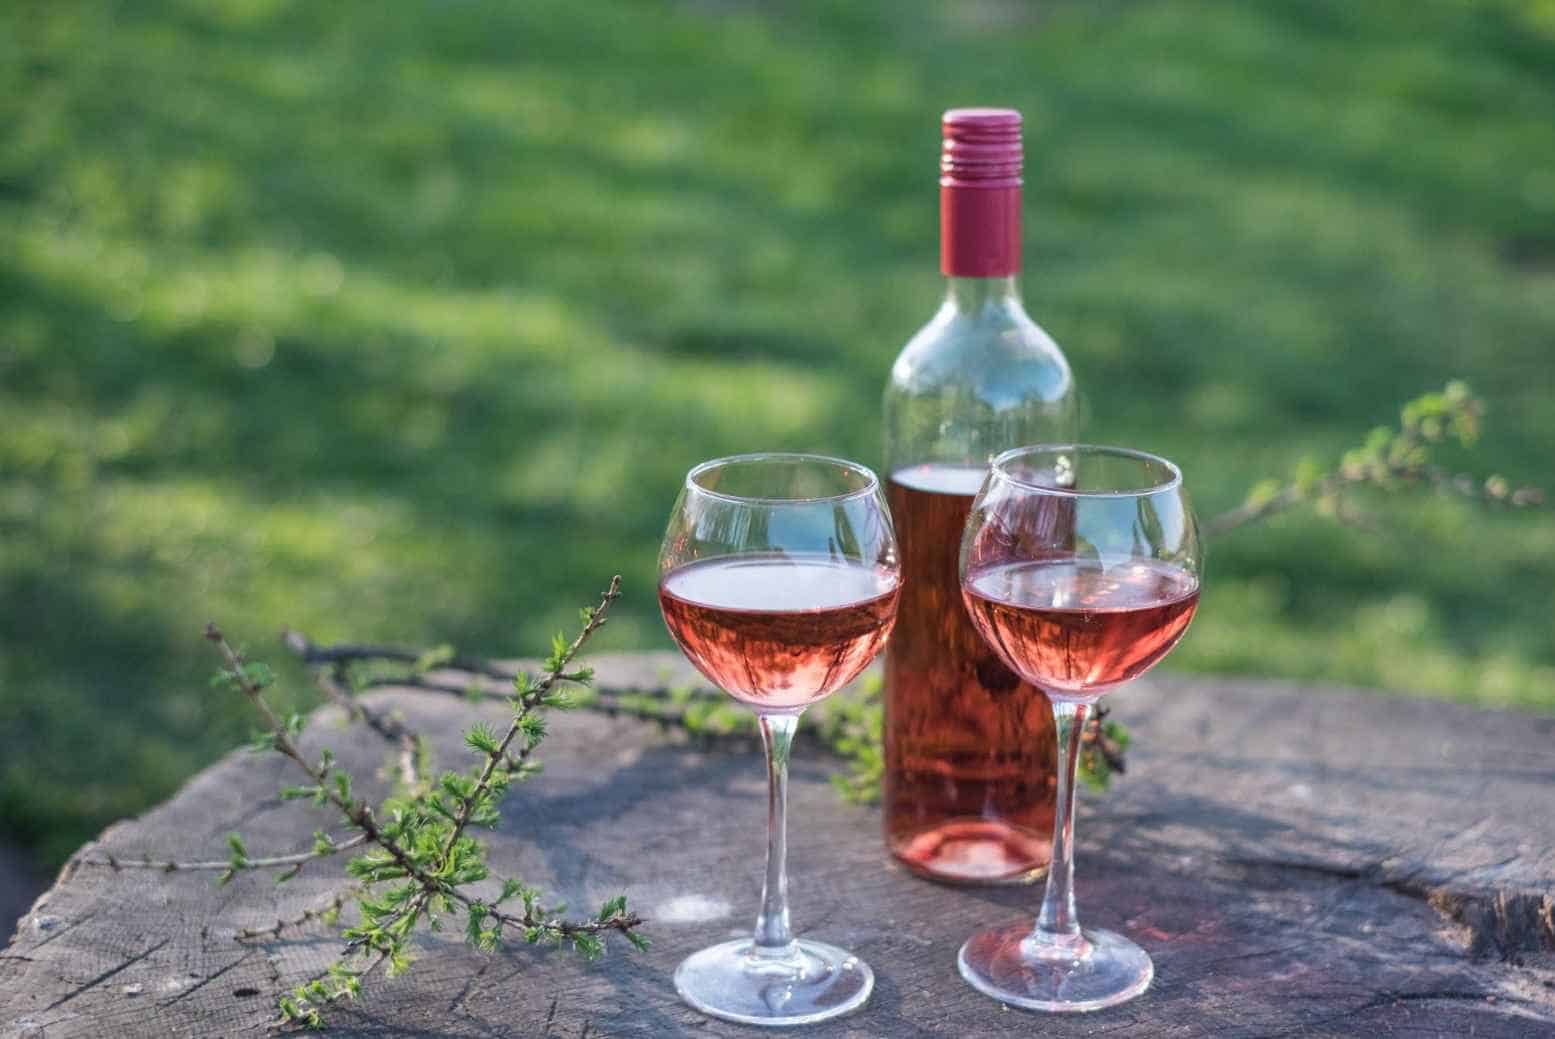 Taste and Appearance of White Zinfandel Wine